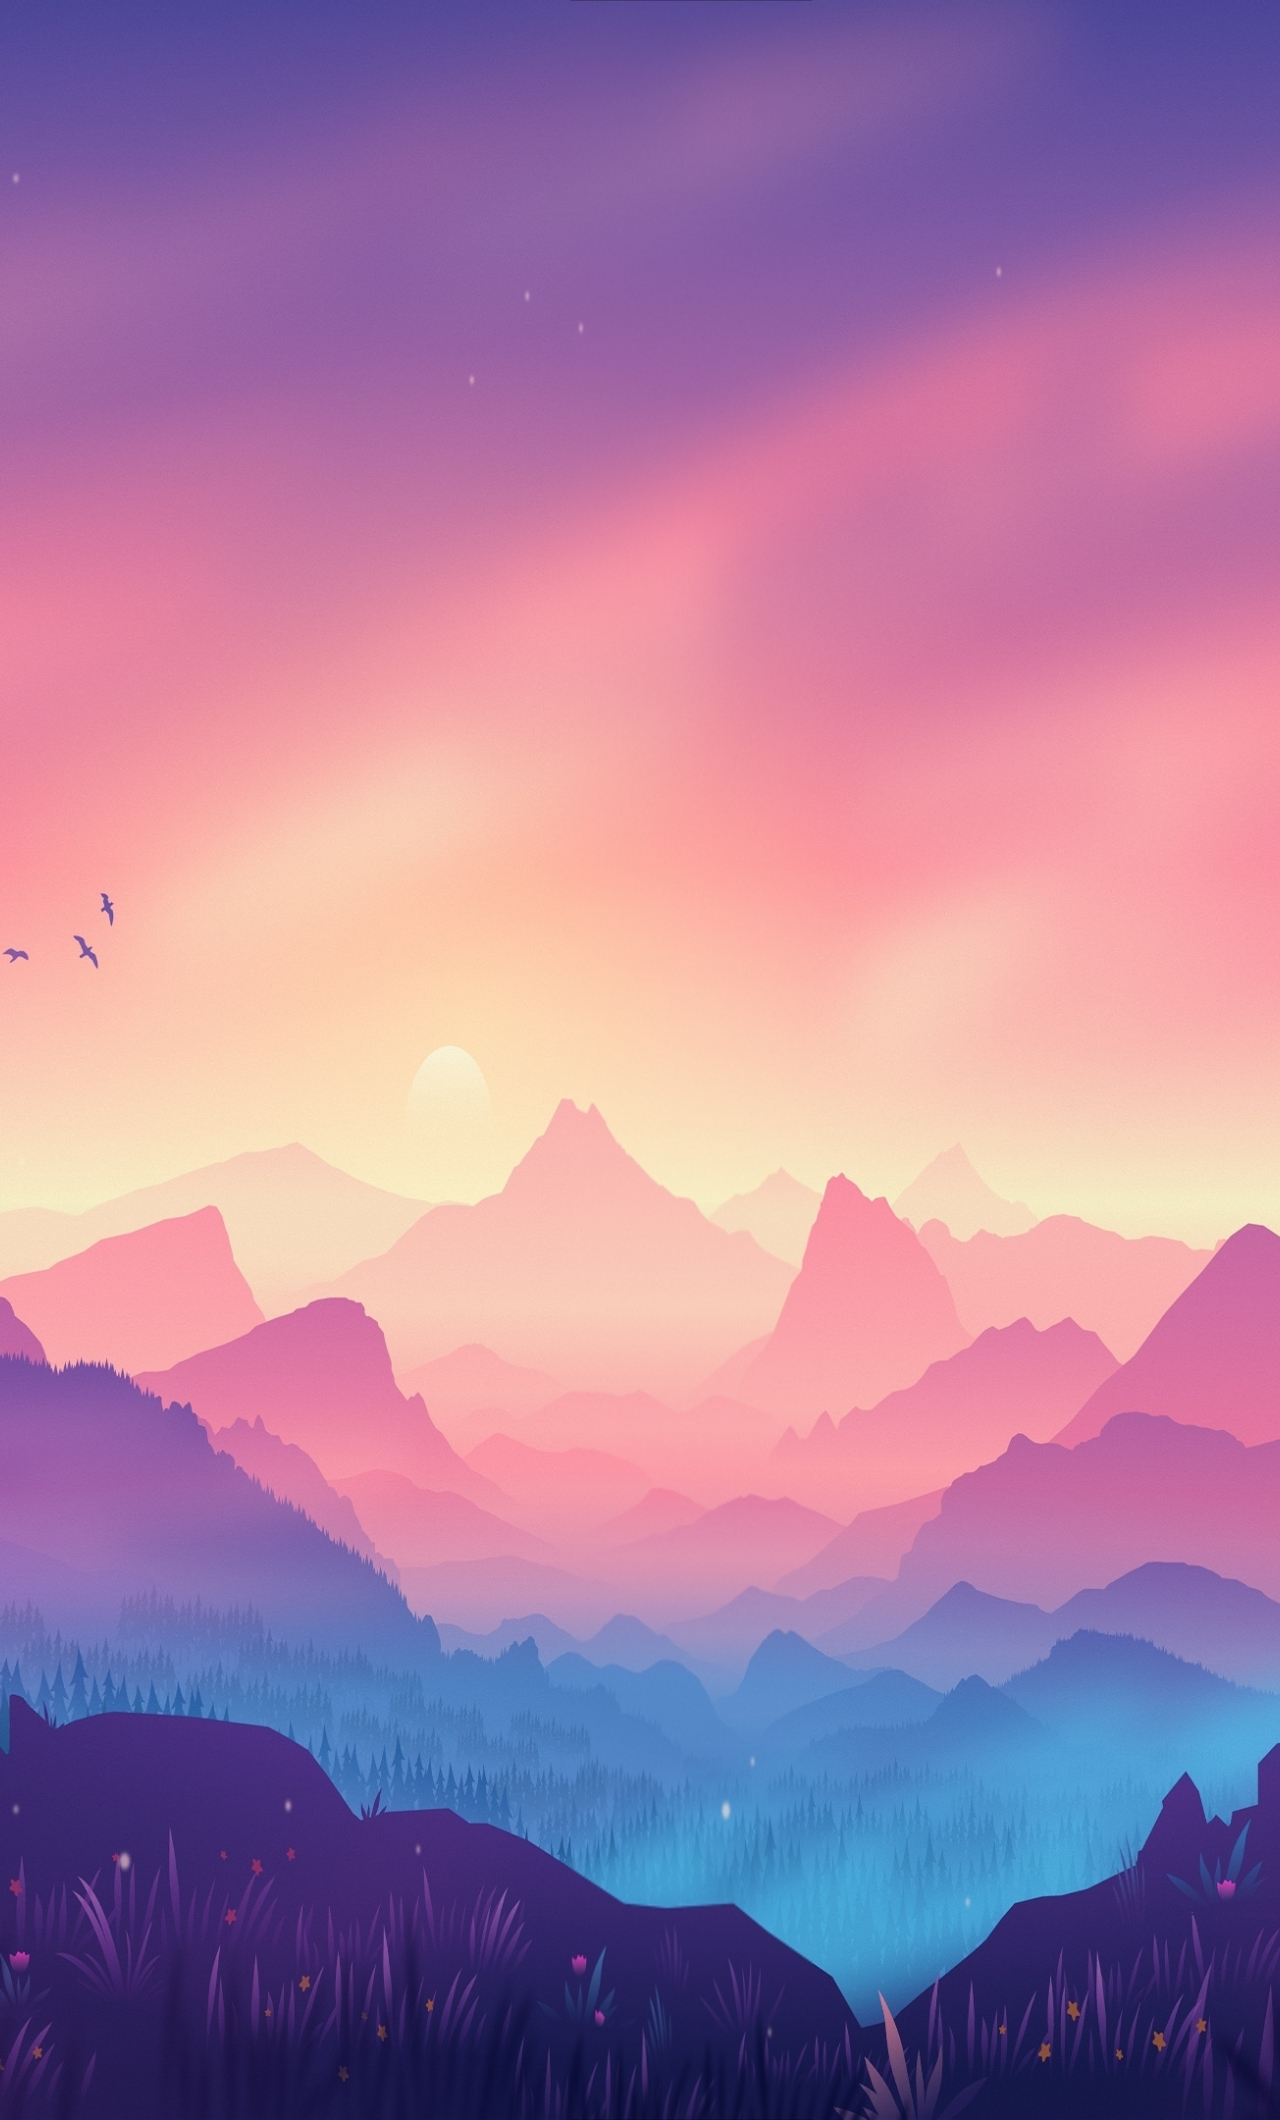 Forest Mountain Artistic Wallpapers